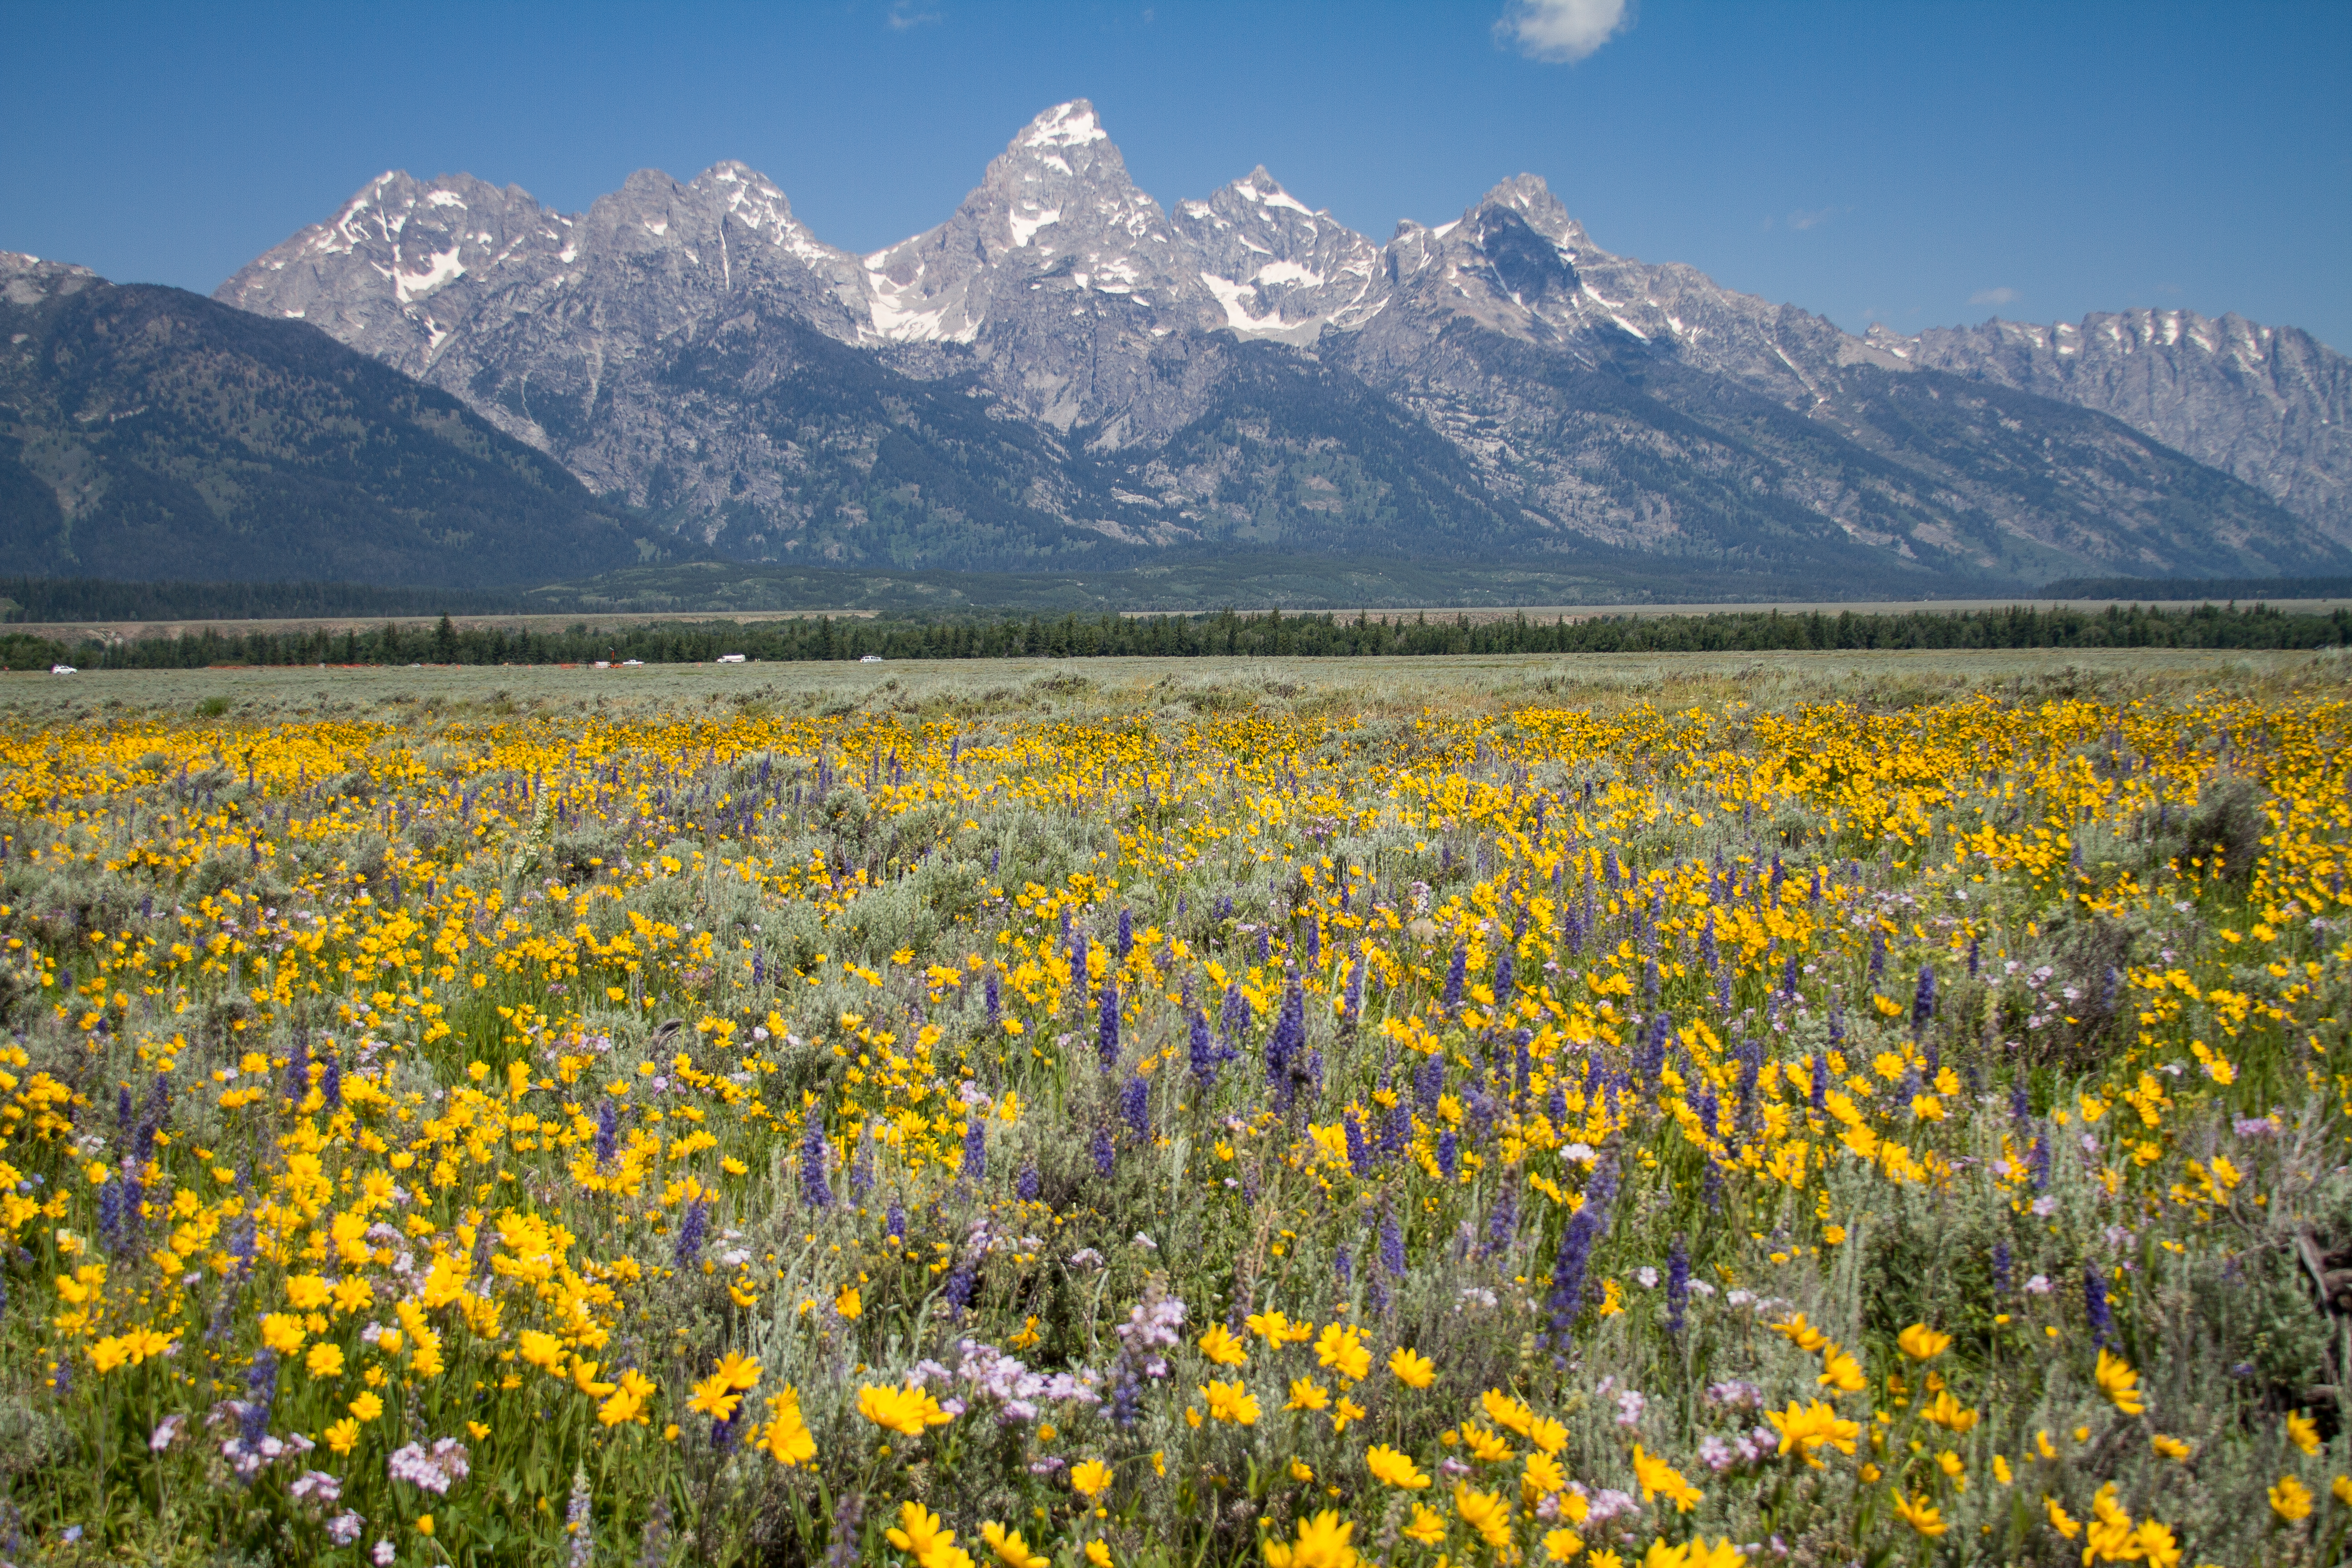 A field of flowers stands before a mountain range.